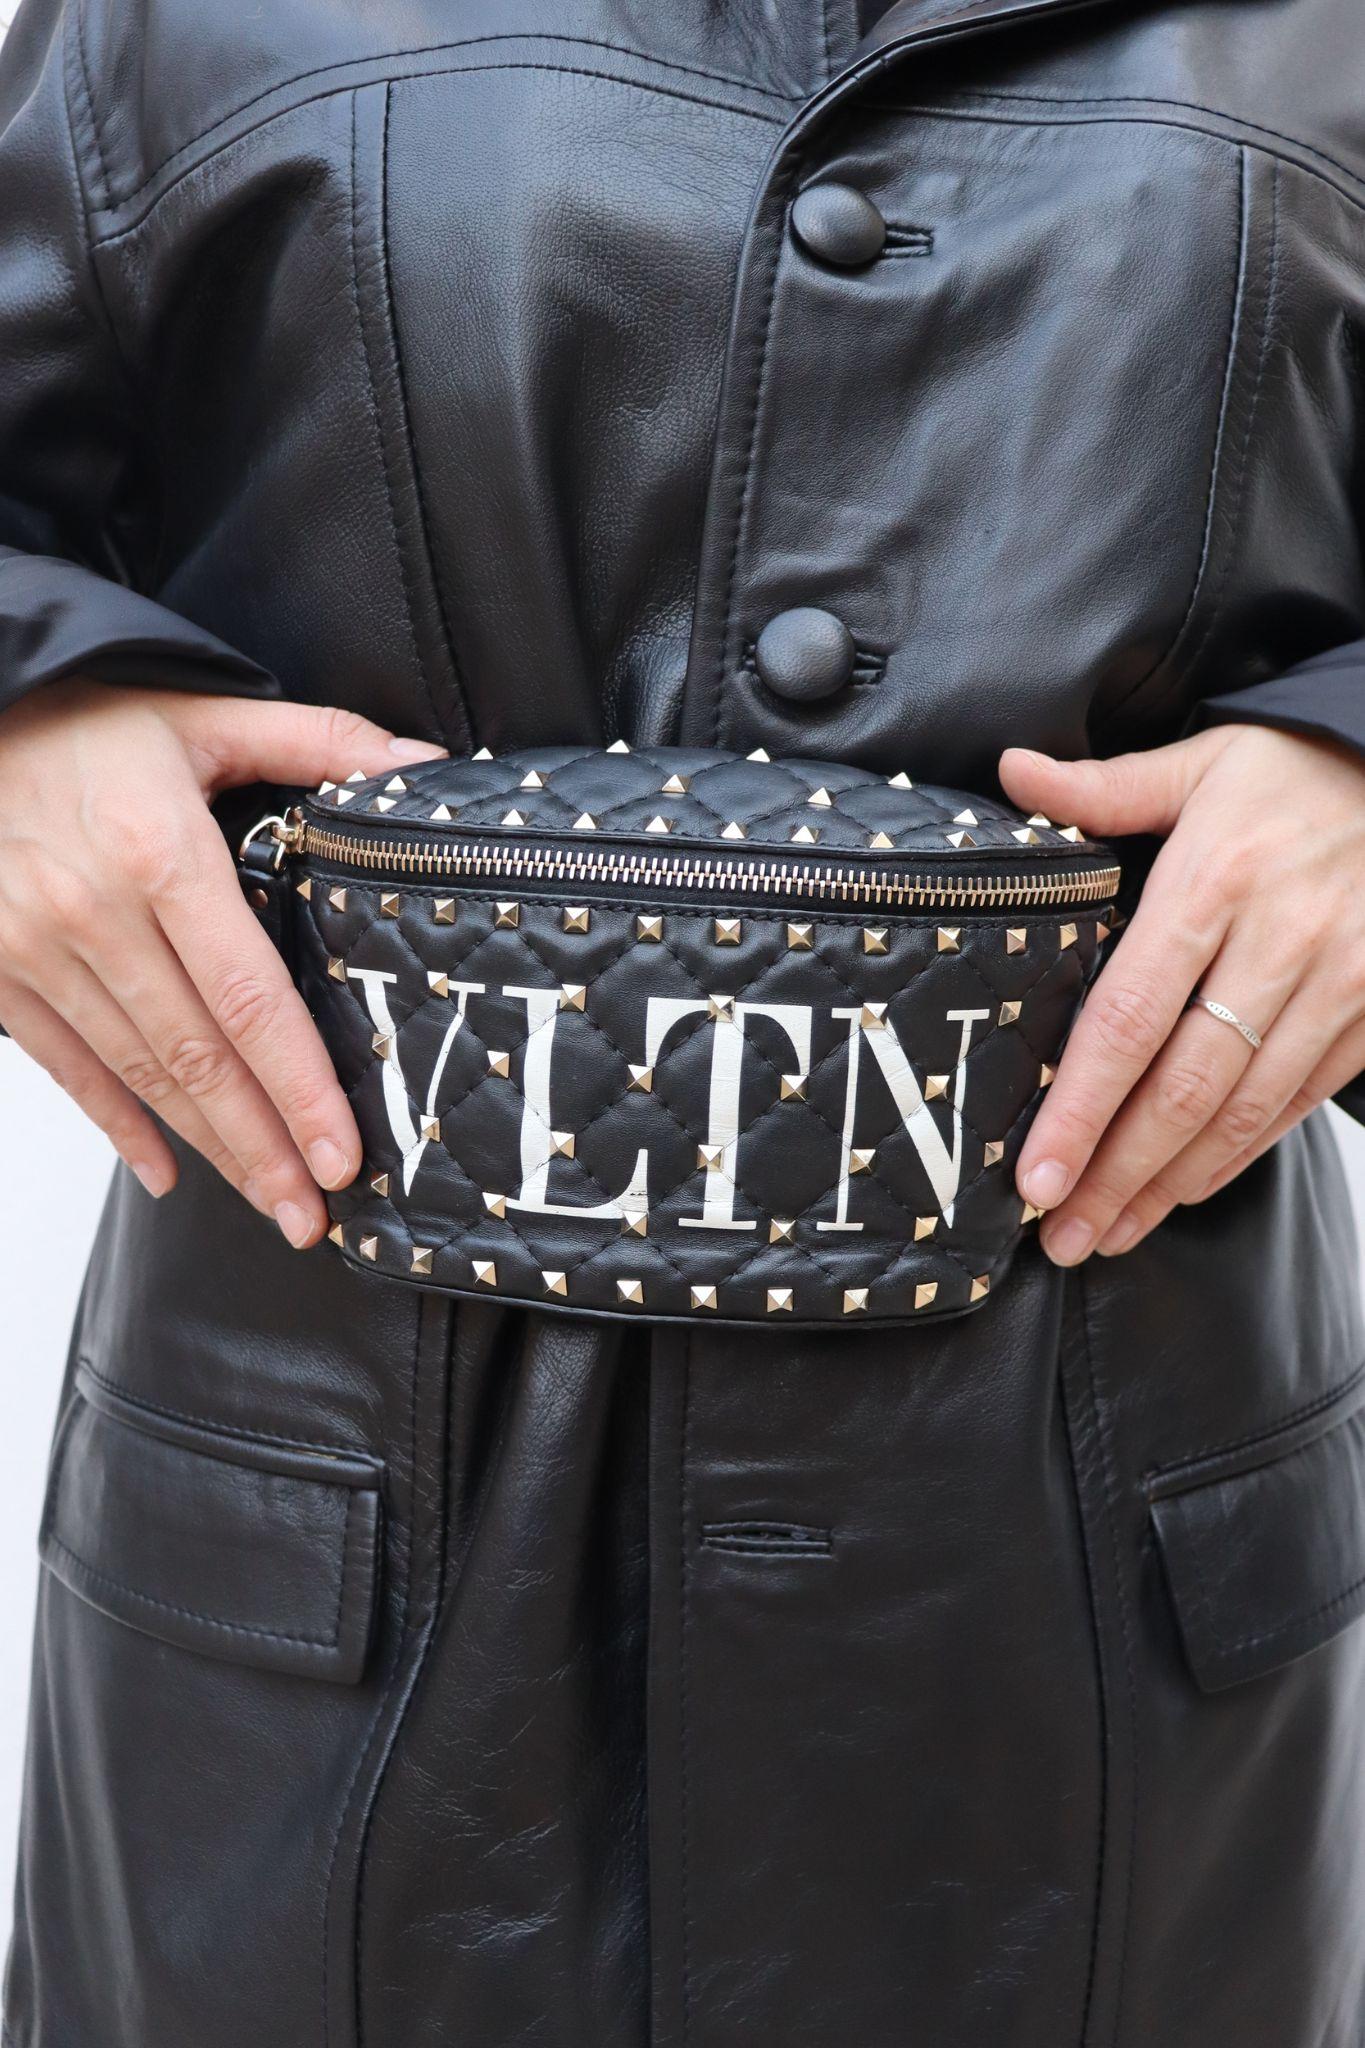 Valentino Black Leather VLTN Rockstud Bum Bag, Features Rockstud embellishments, a zipper on the front, and leather-lined interior.

Material: Leather.
Hardware: Gold.
Height: 11cm
Width: 20cm / Top
Depth: 5cm
Overall condition: Very good
Interior